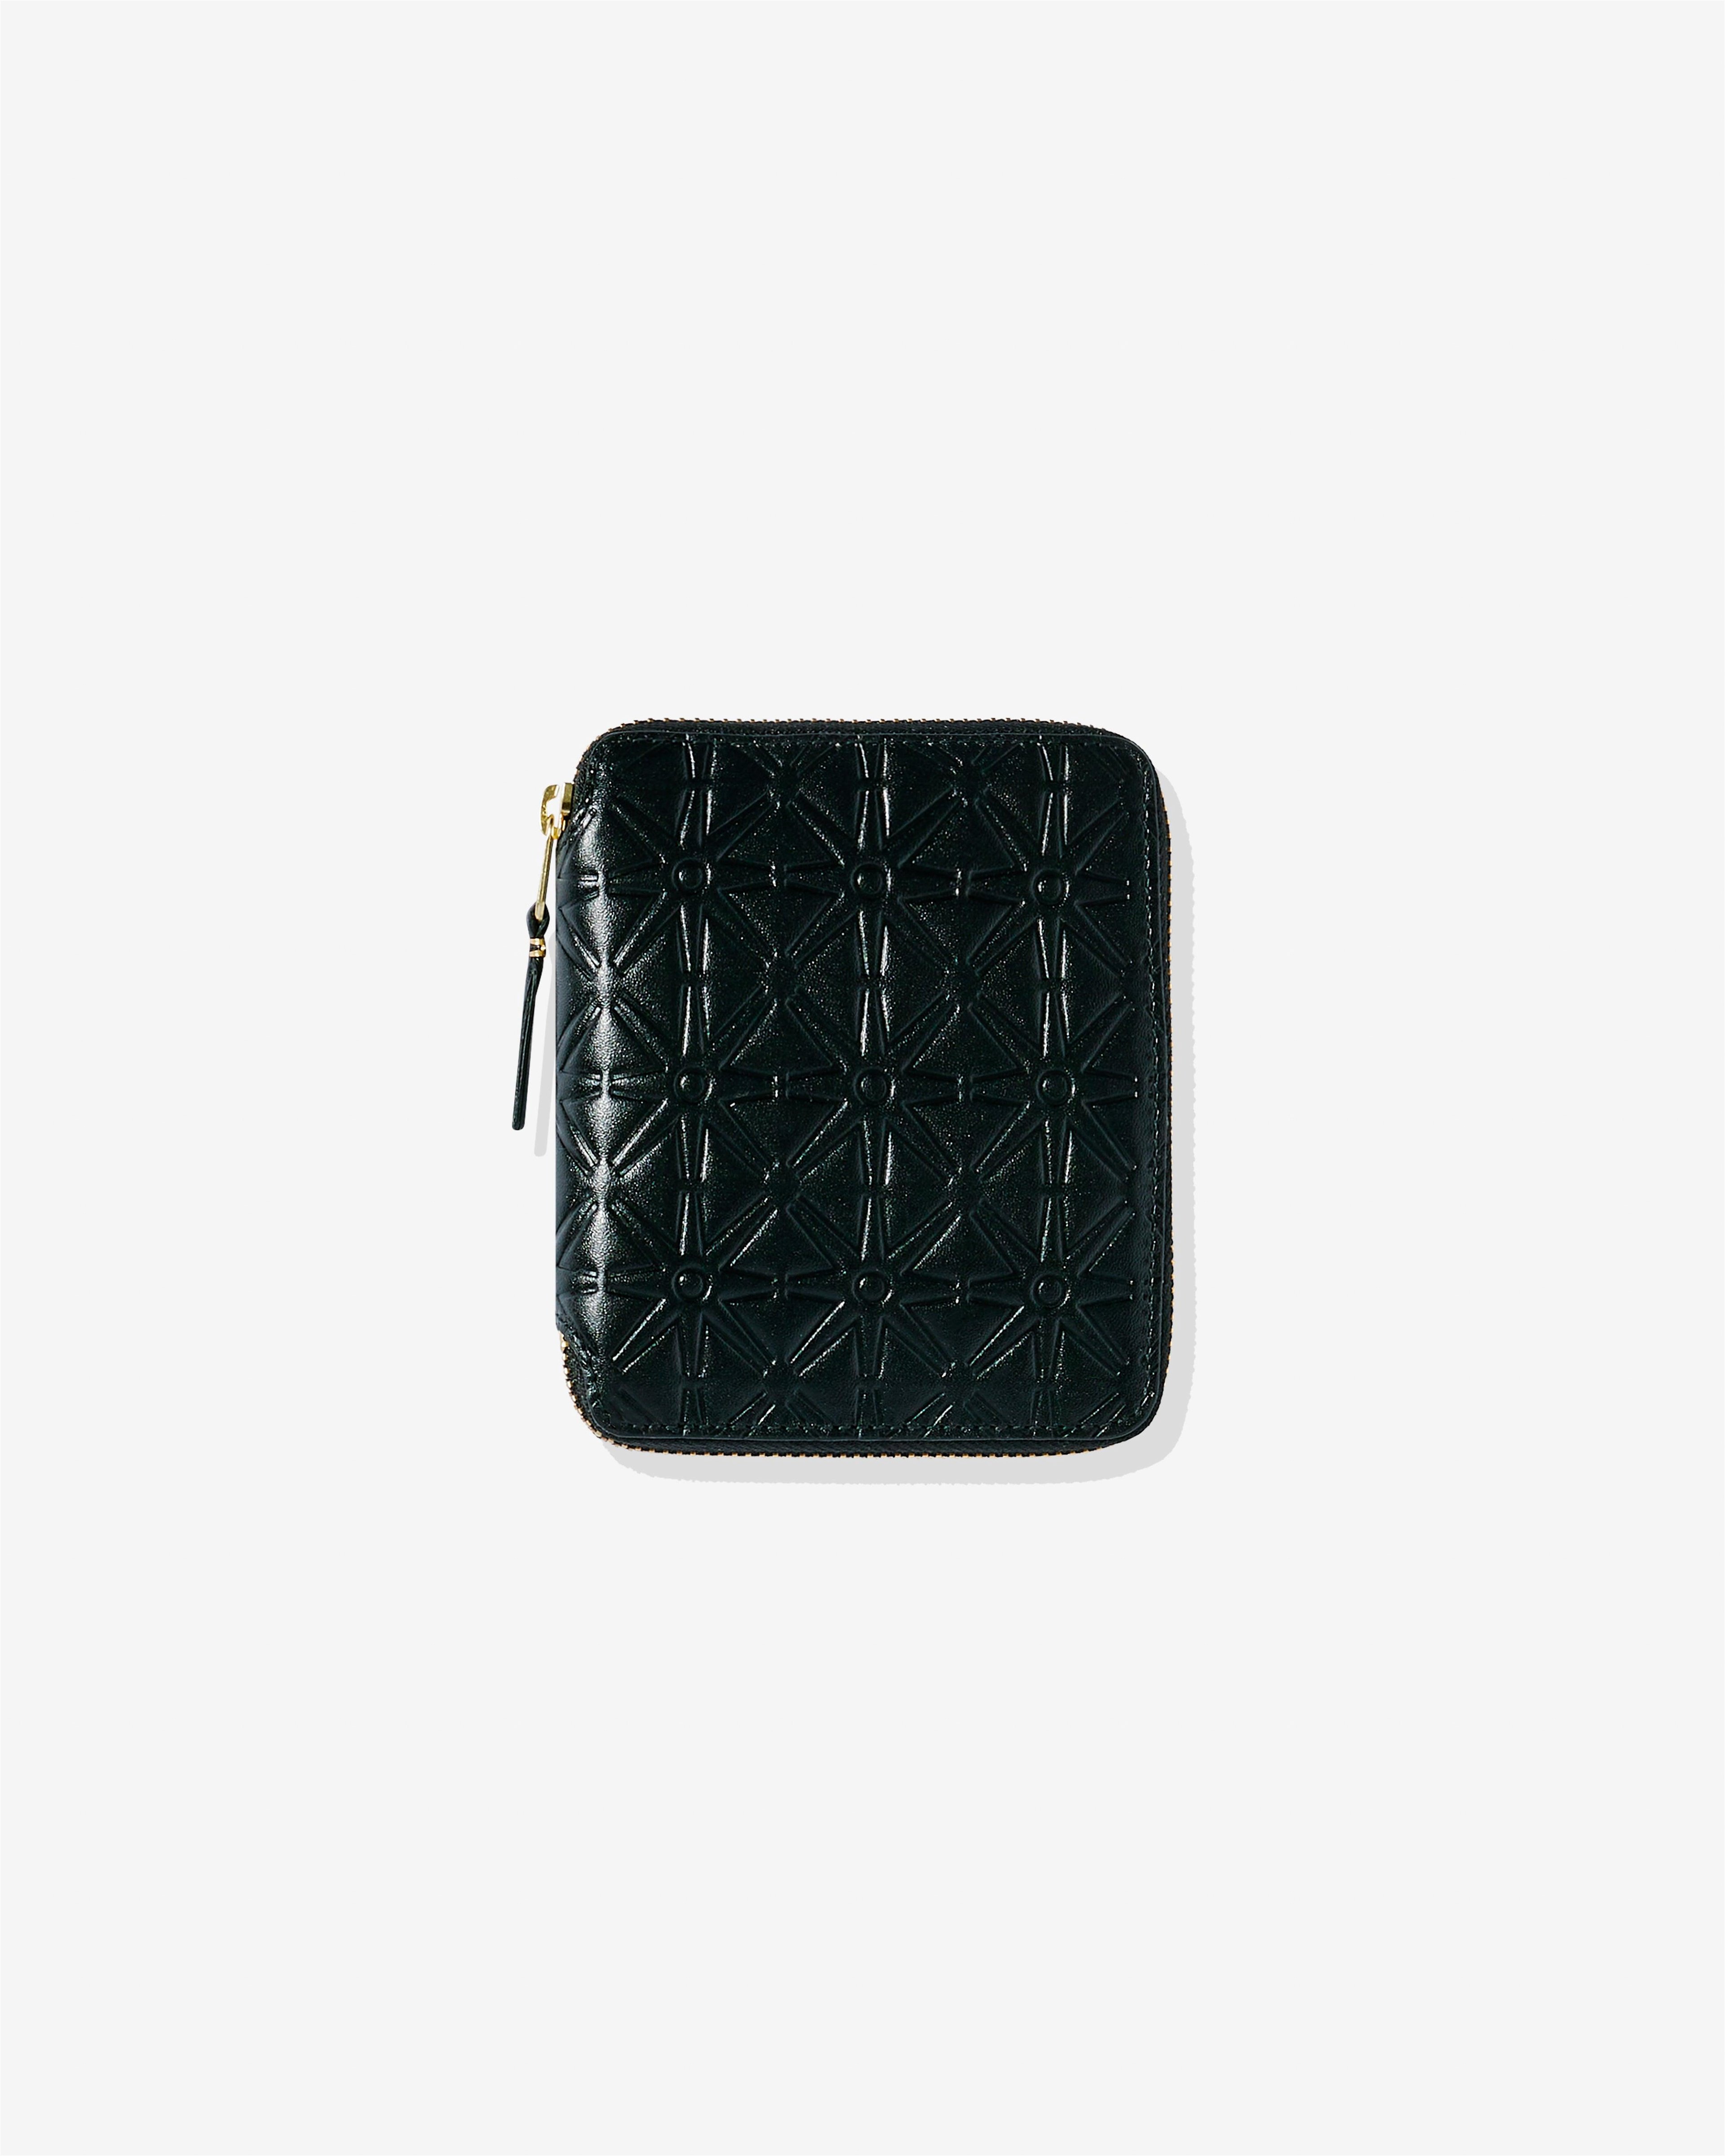 CDG Wallet - Embossed A Full Zip Around Wallet - (Black SA210E) by COMME DES GARCONS